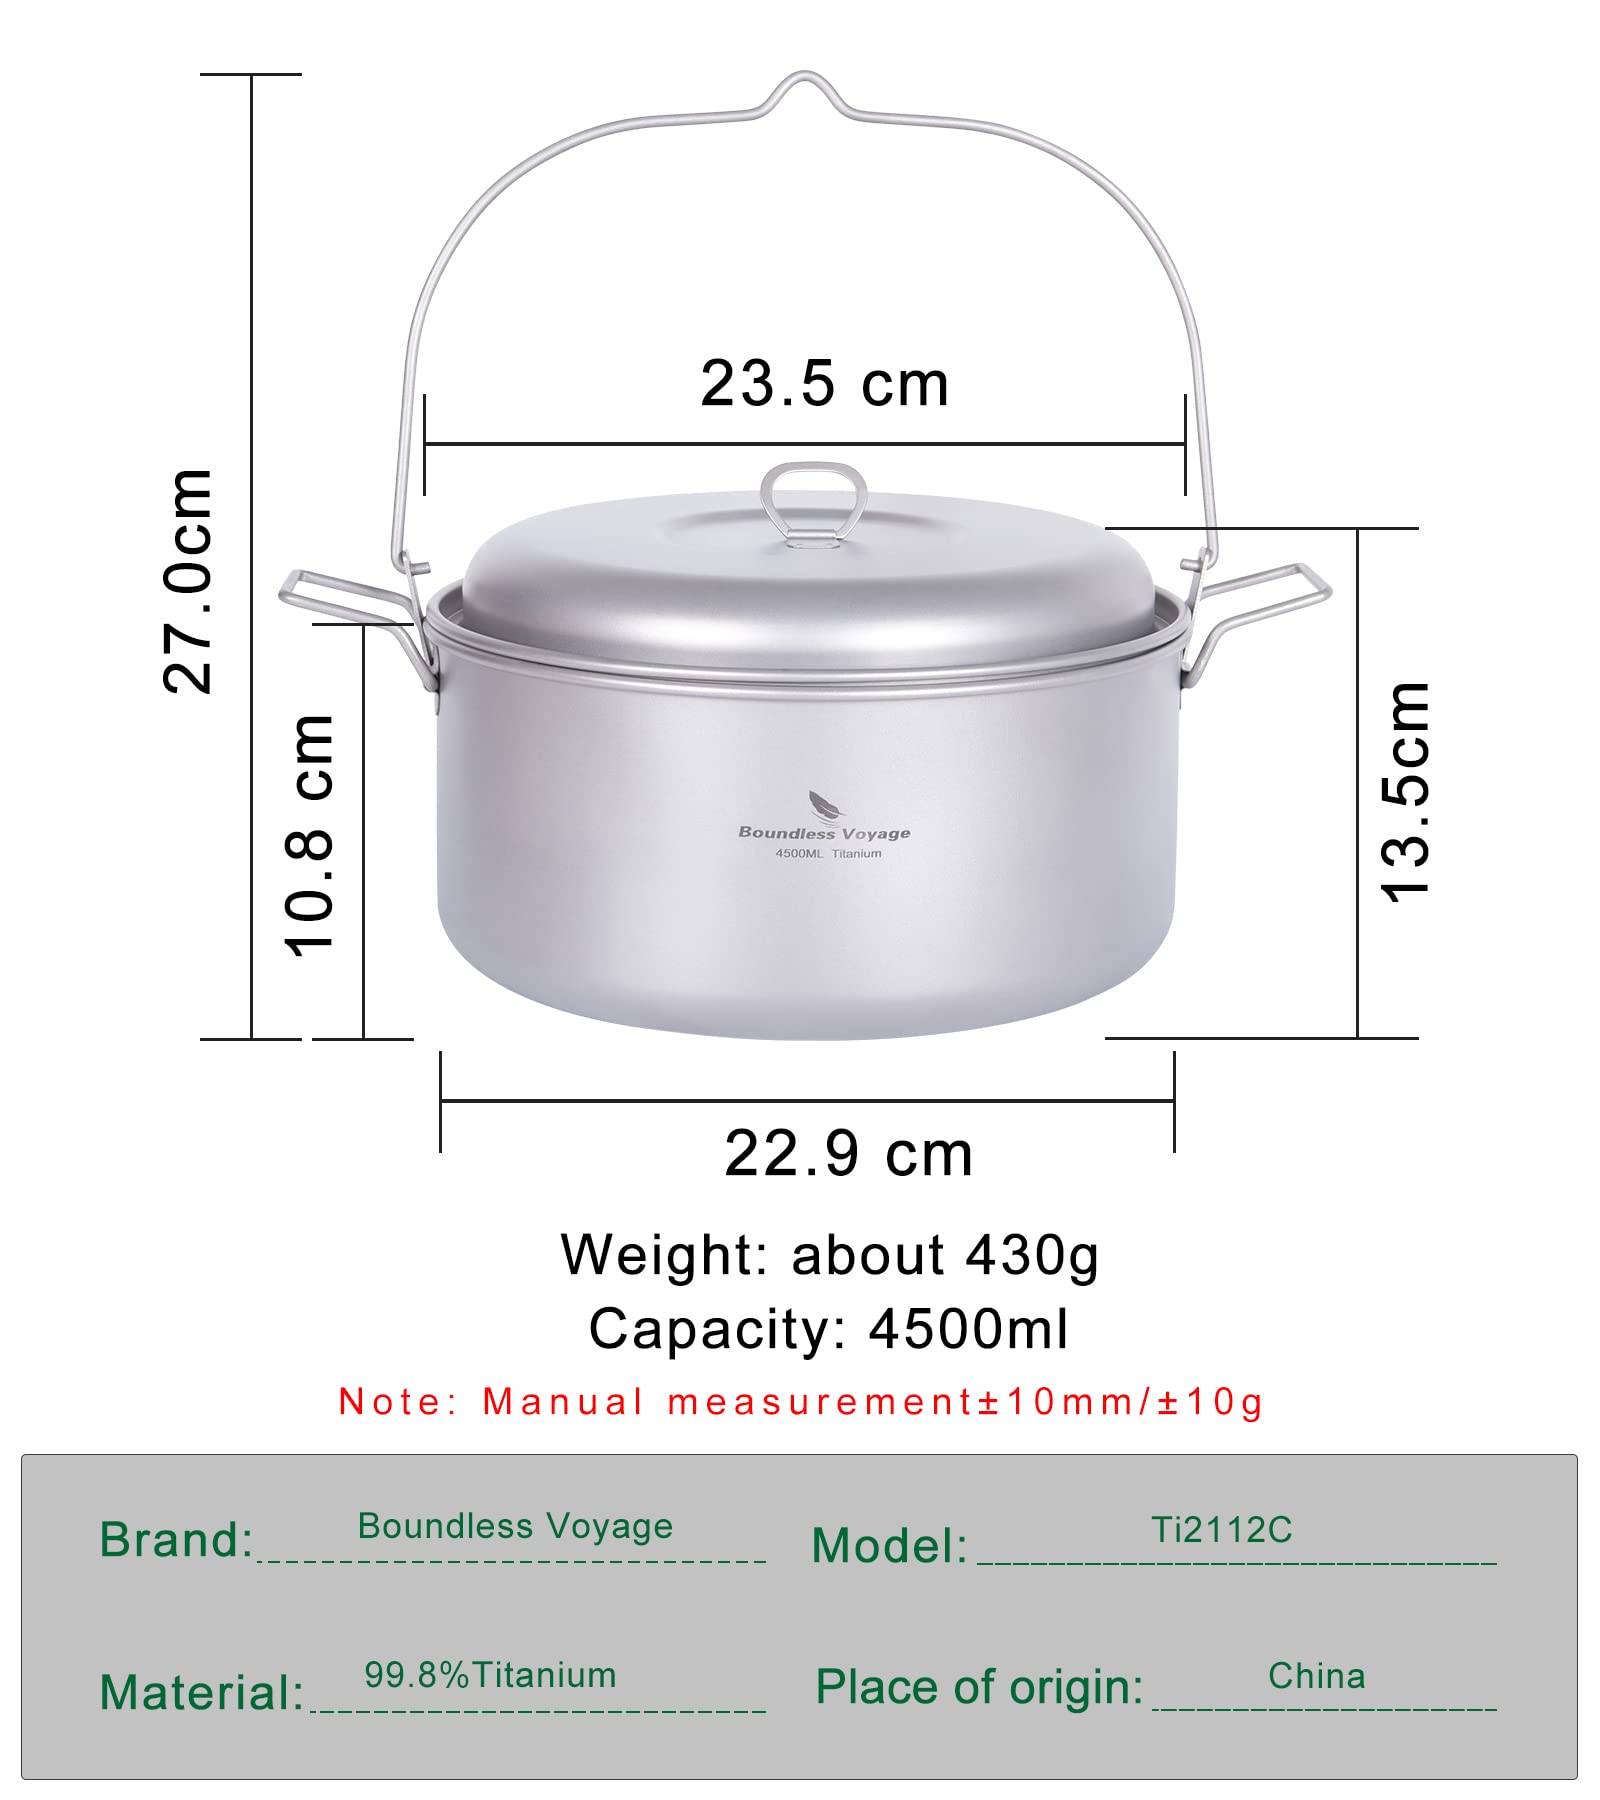 Boundless Voyage Titanium 4.5L Hanging Pot with Steaming Rack Folding Handle Outdoor Camping Cooking Stockpot Steamer Set (4.5L Pot)